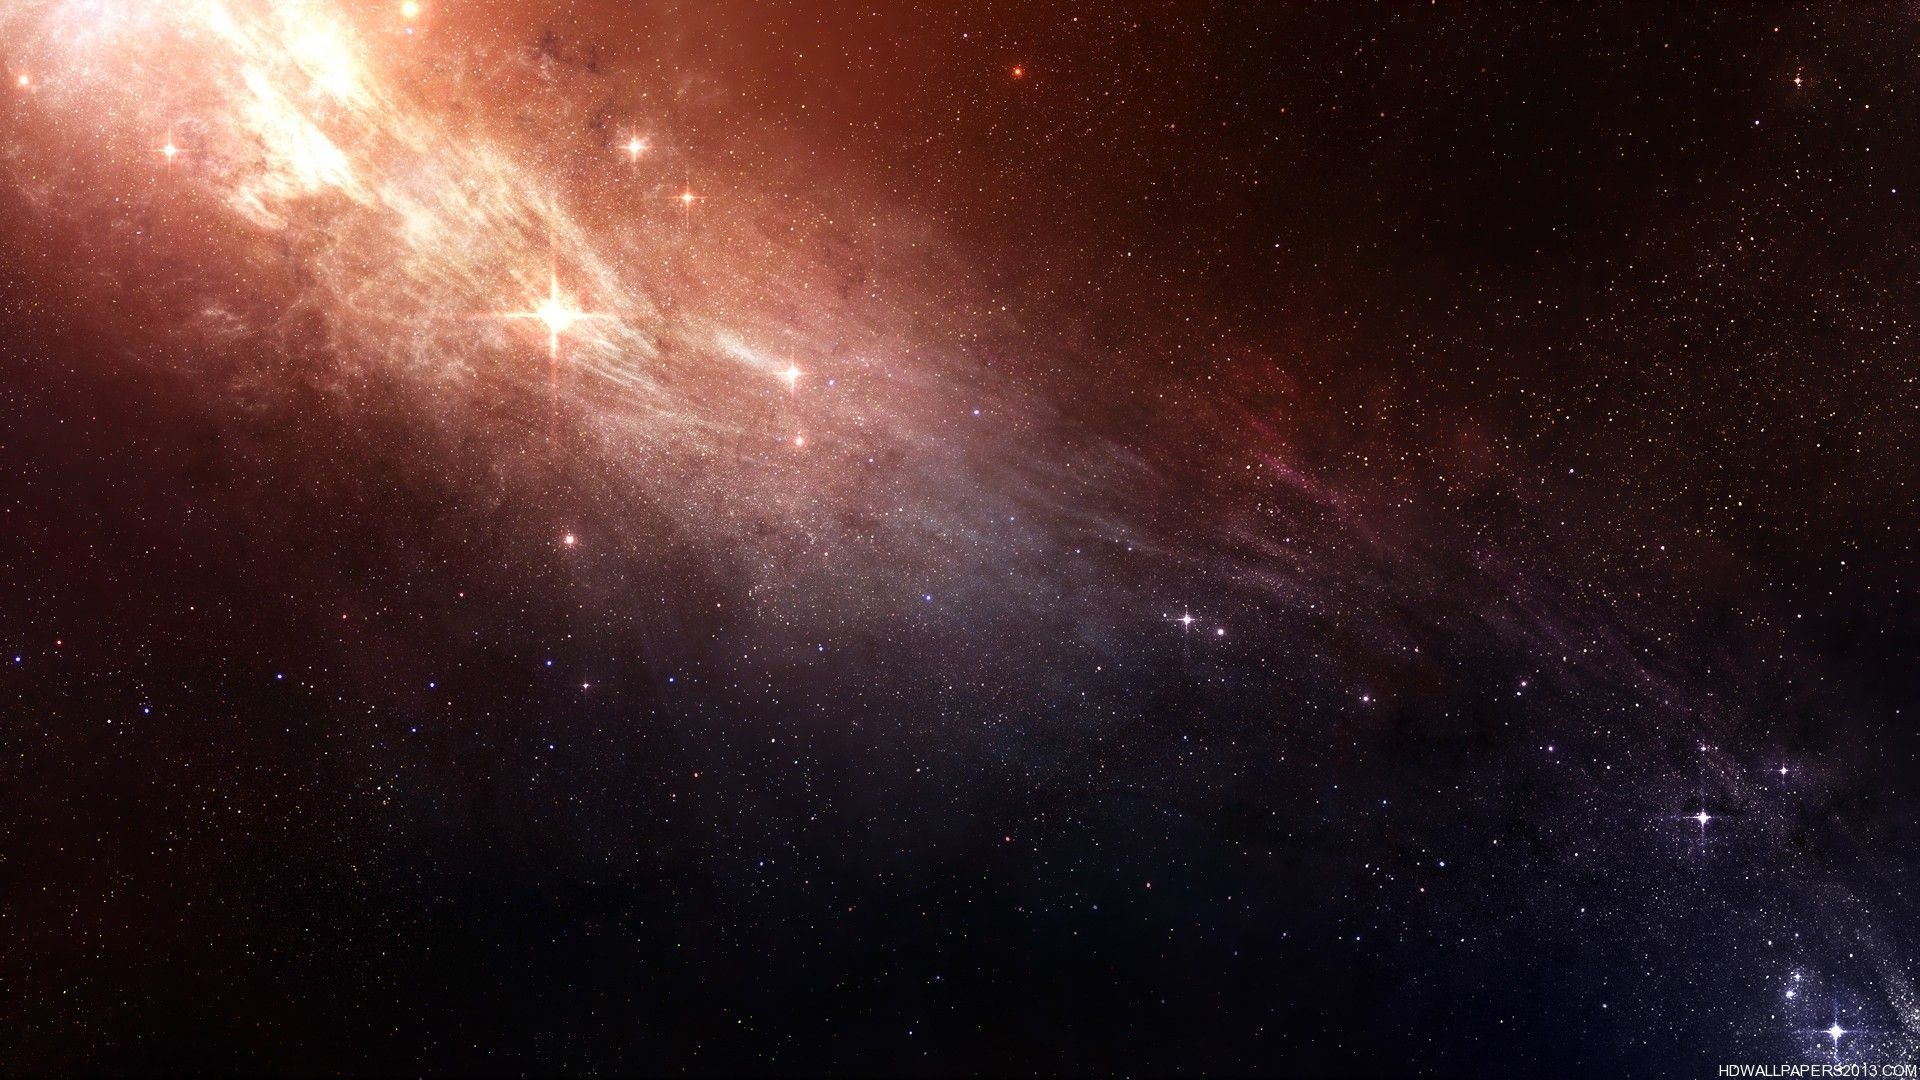 Universe space galaxy, HD space wallpapers, Astronomical beauty, Cosmic immersion, 1920x1080 Full HD Desktop